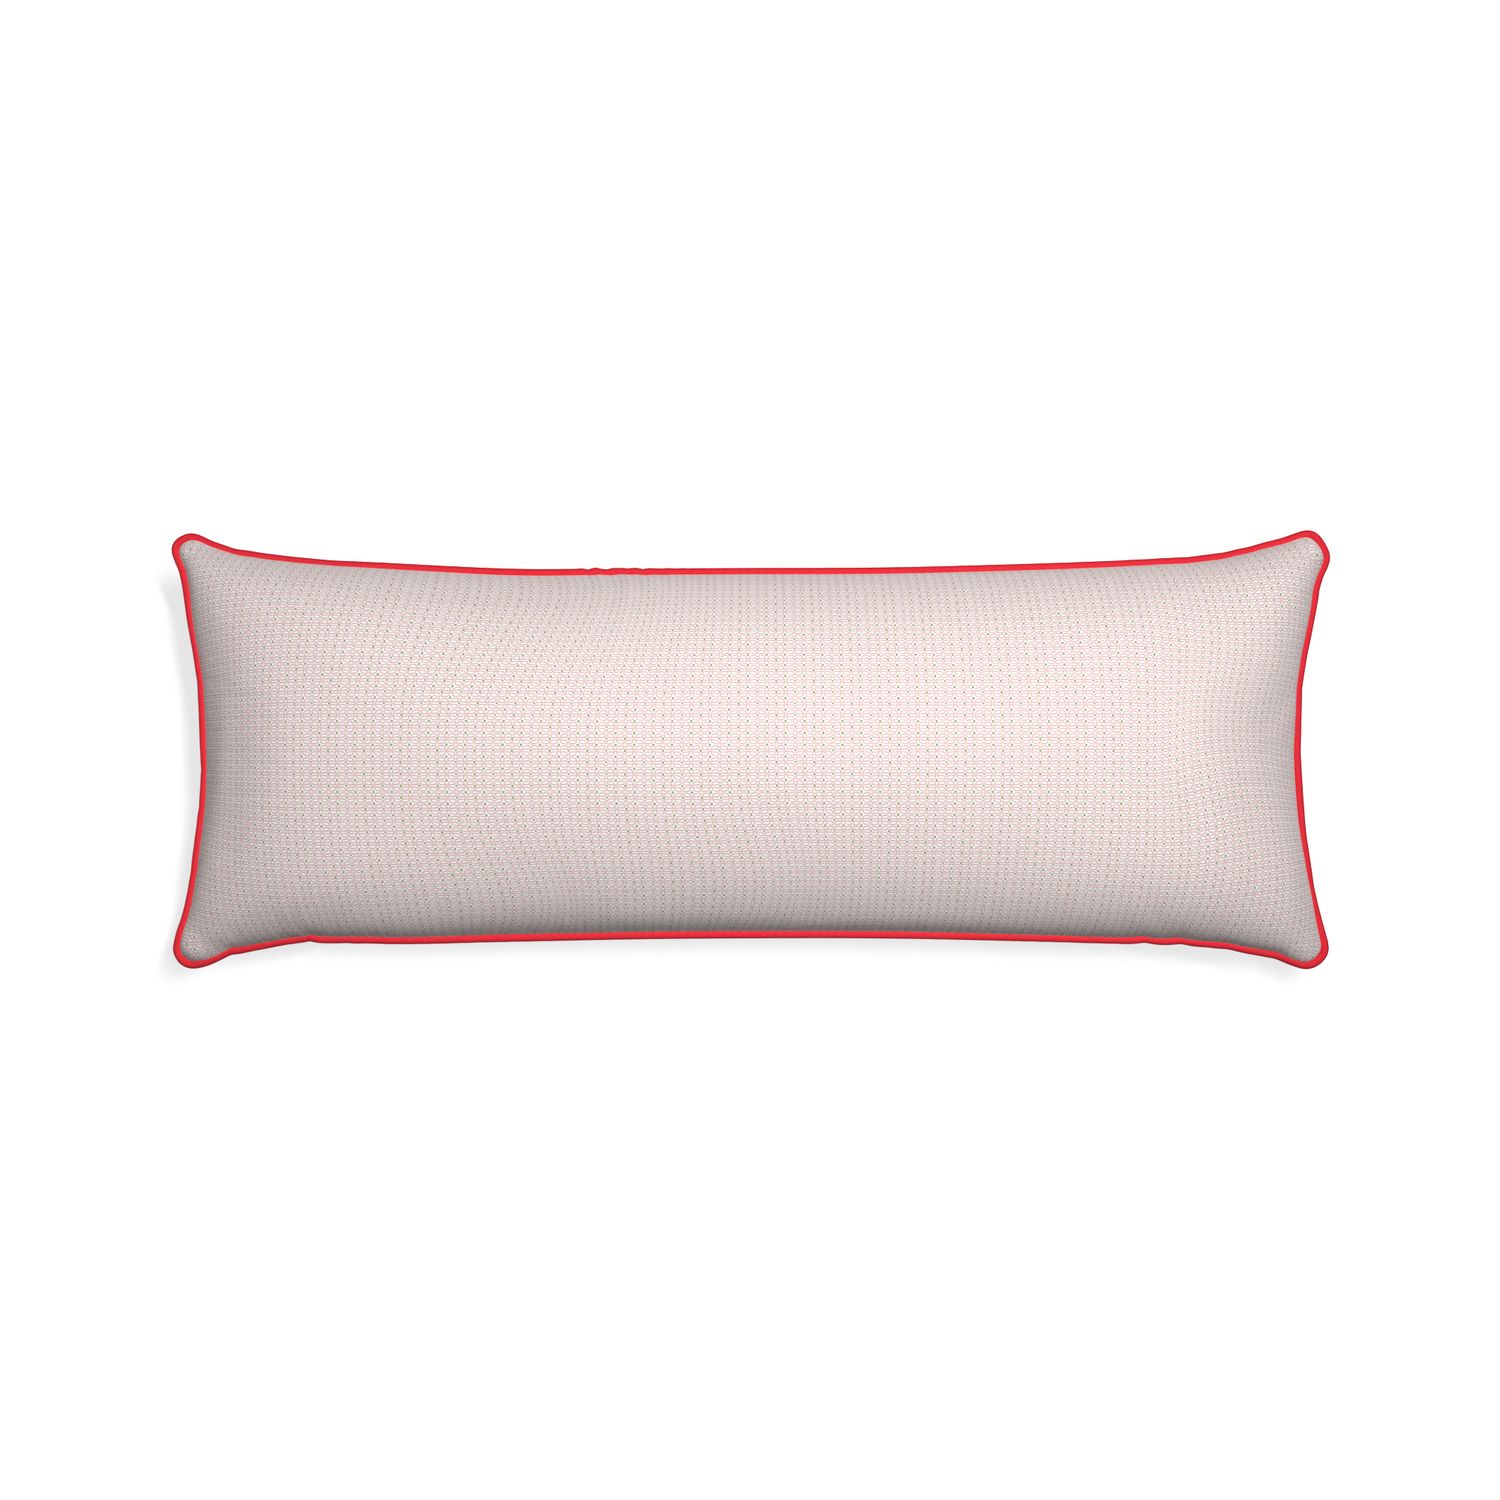 Xl-lumbar loomi pink custom pillow with cherry piping on white background